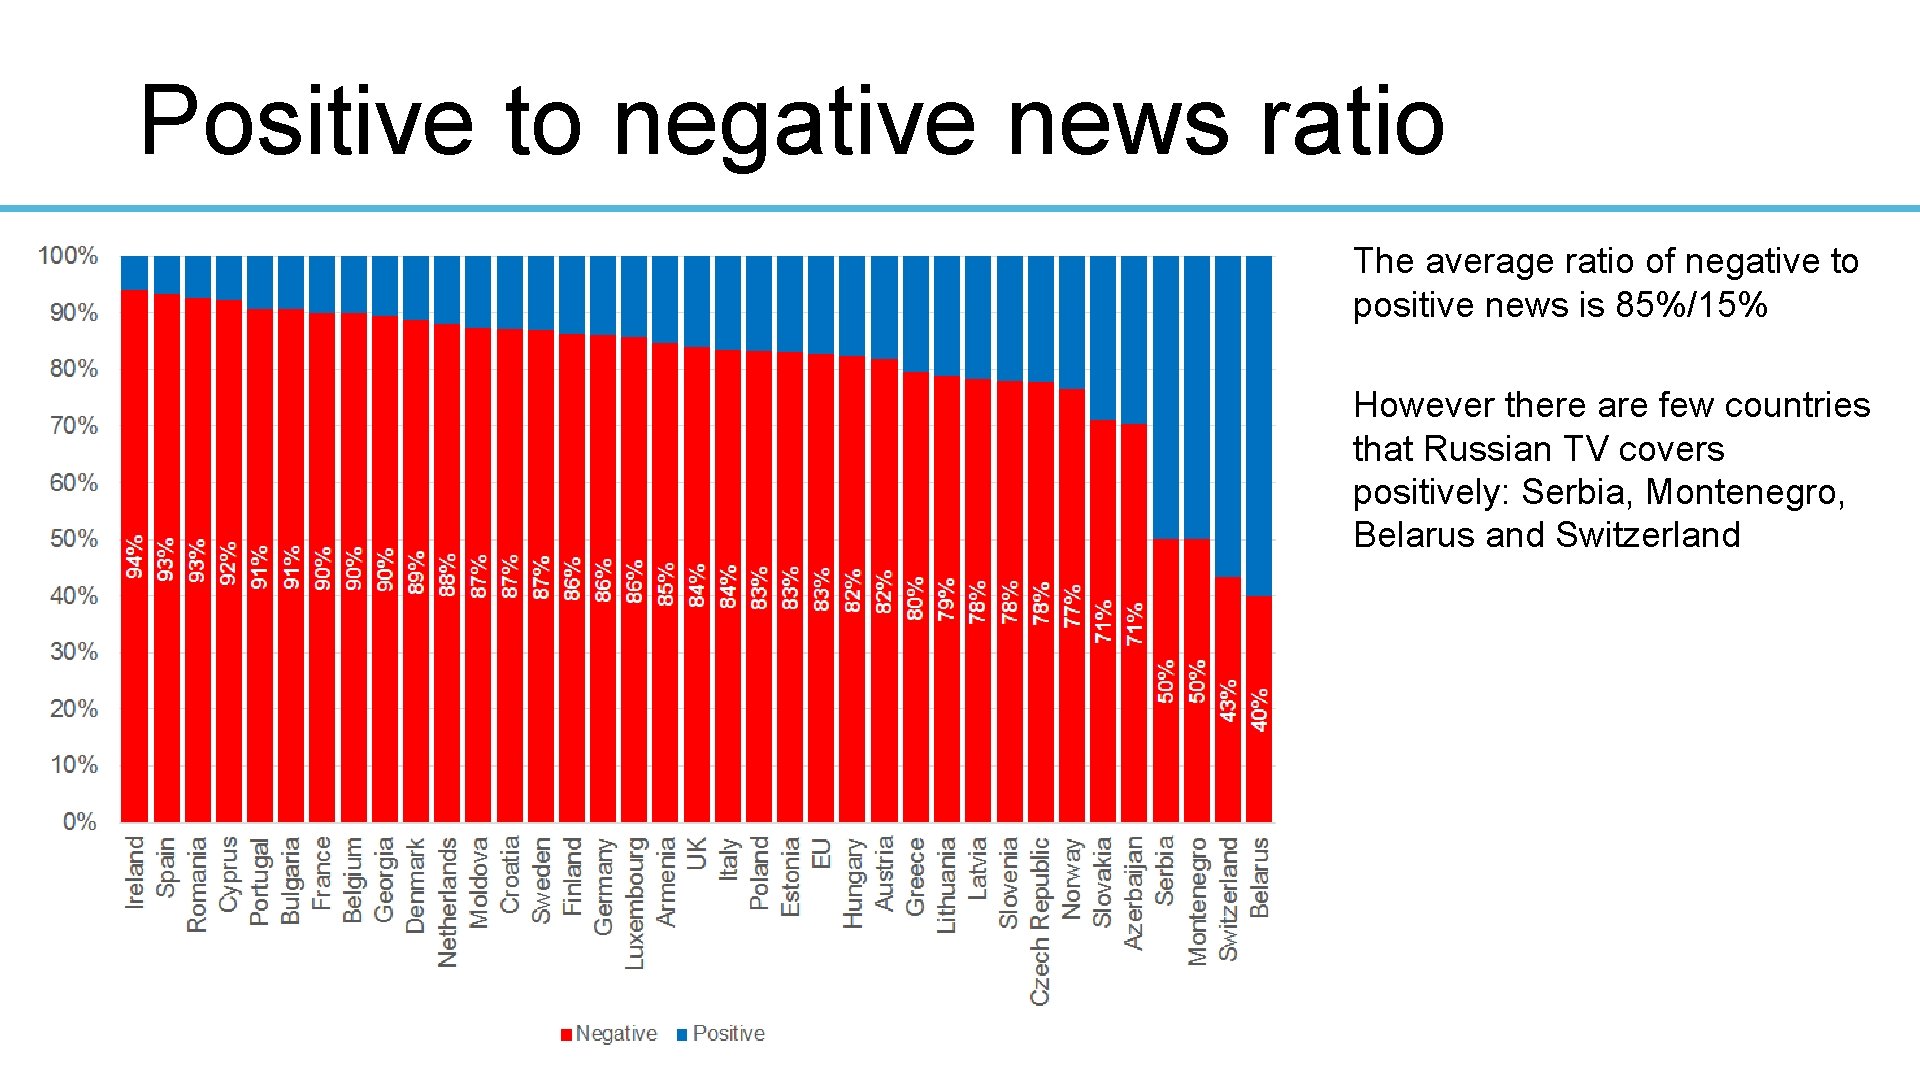 Positive to negative news ratio The average ratio of negative to positive news is